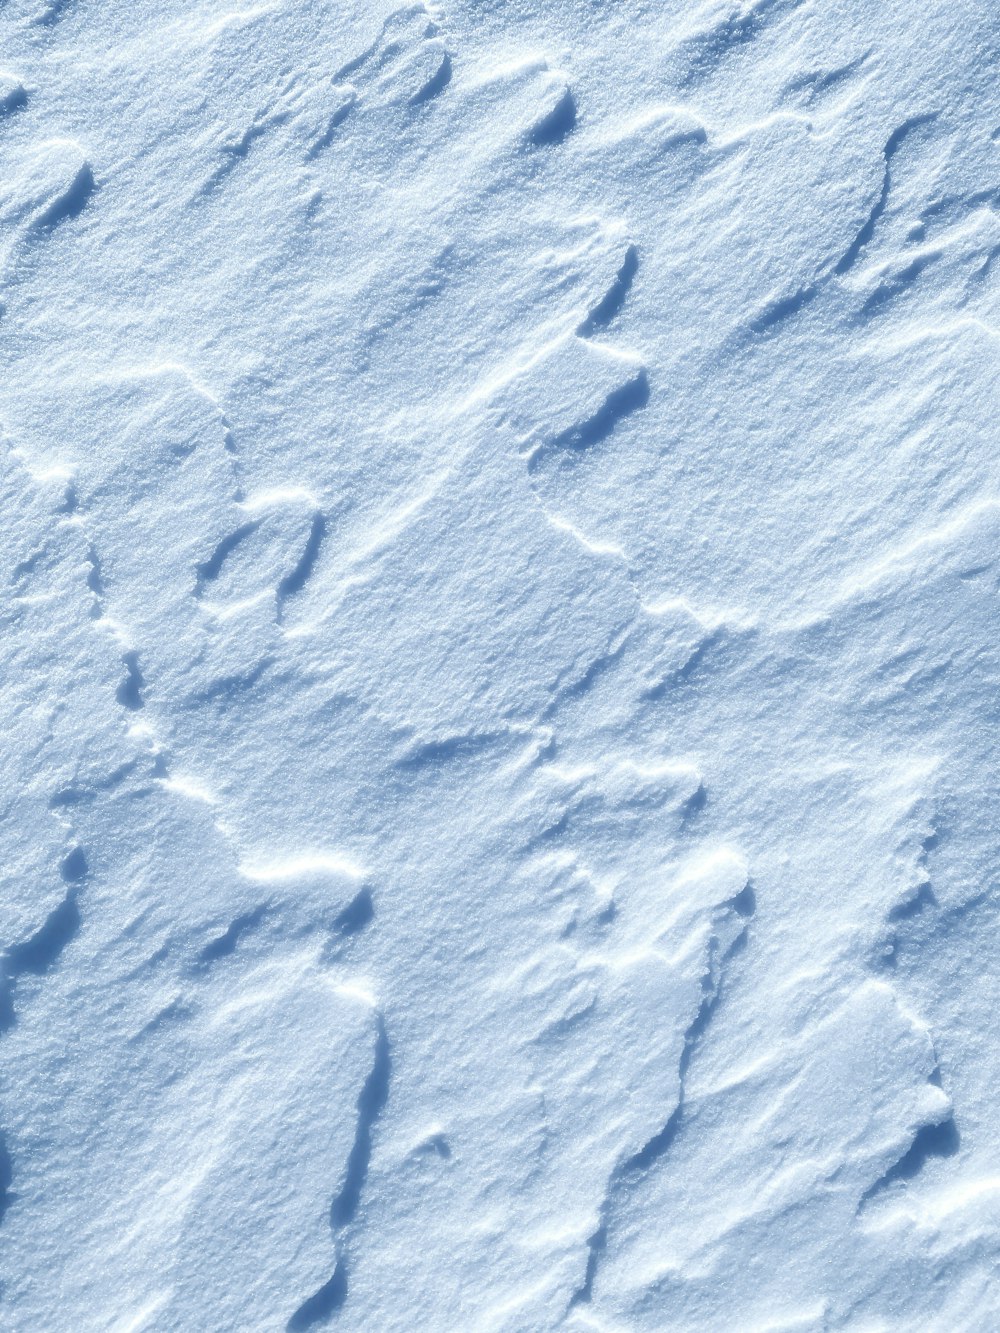 a snow covered ground with footprints in the snow